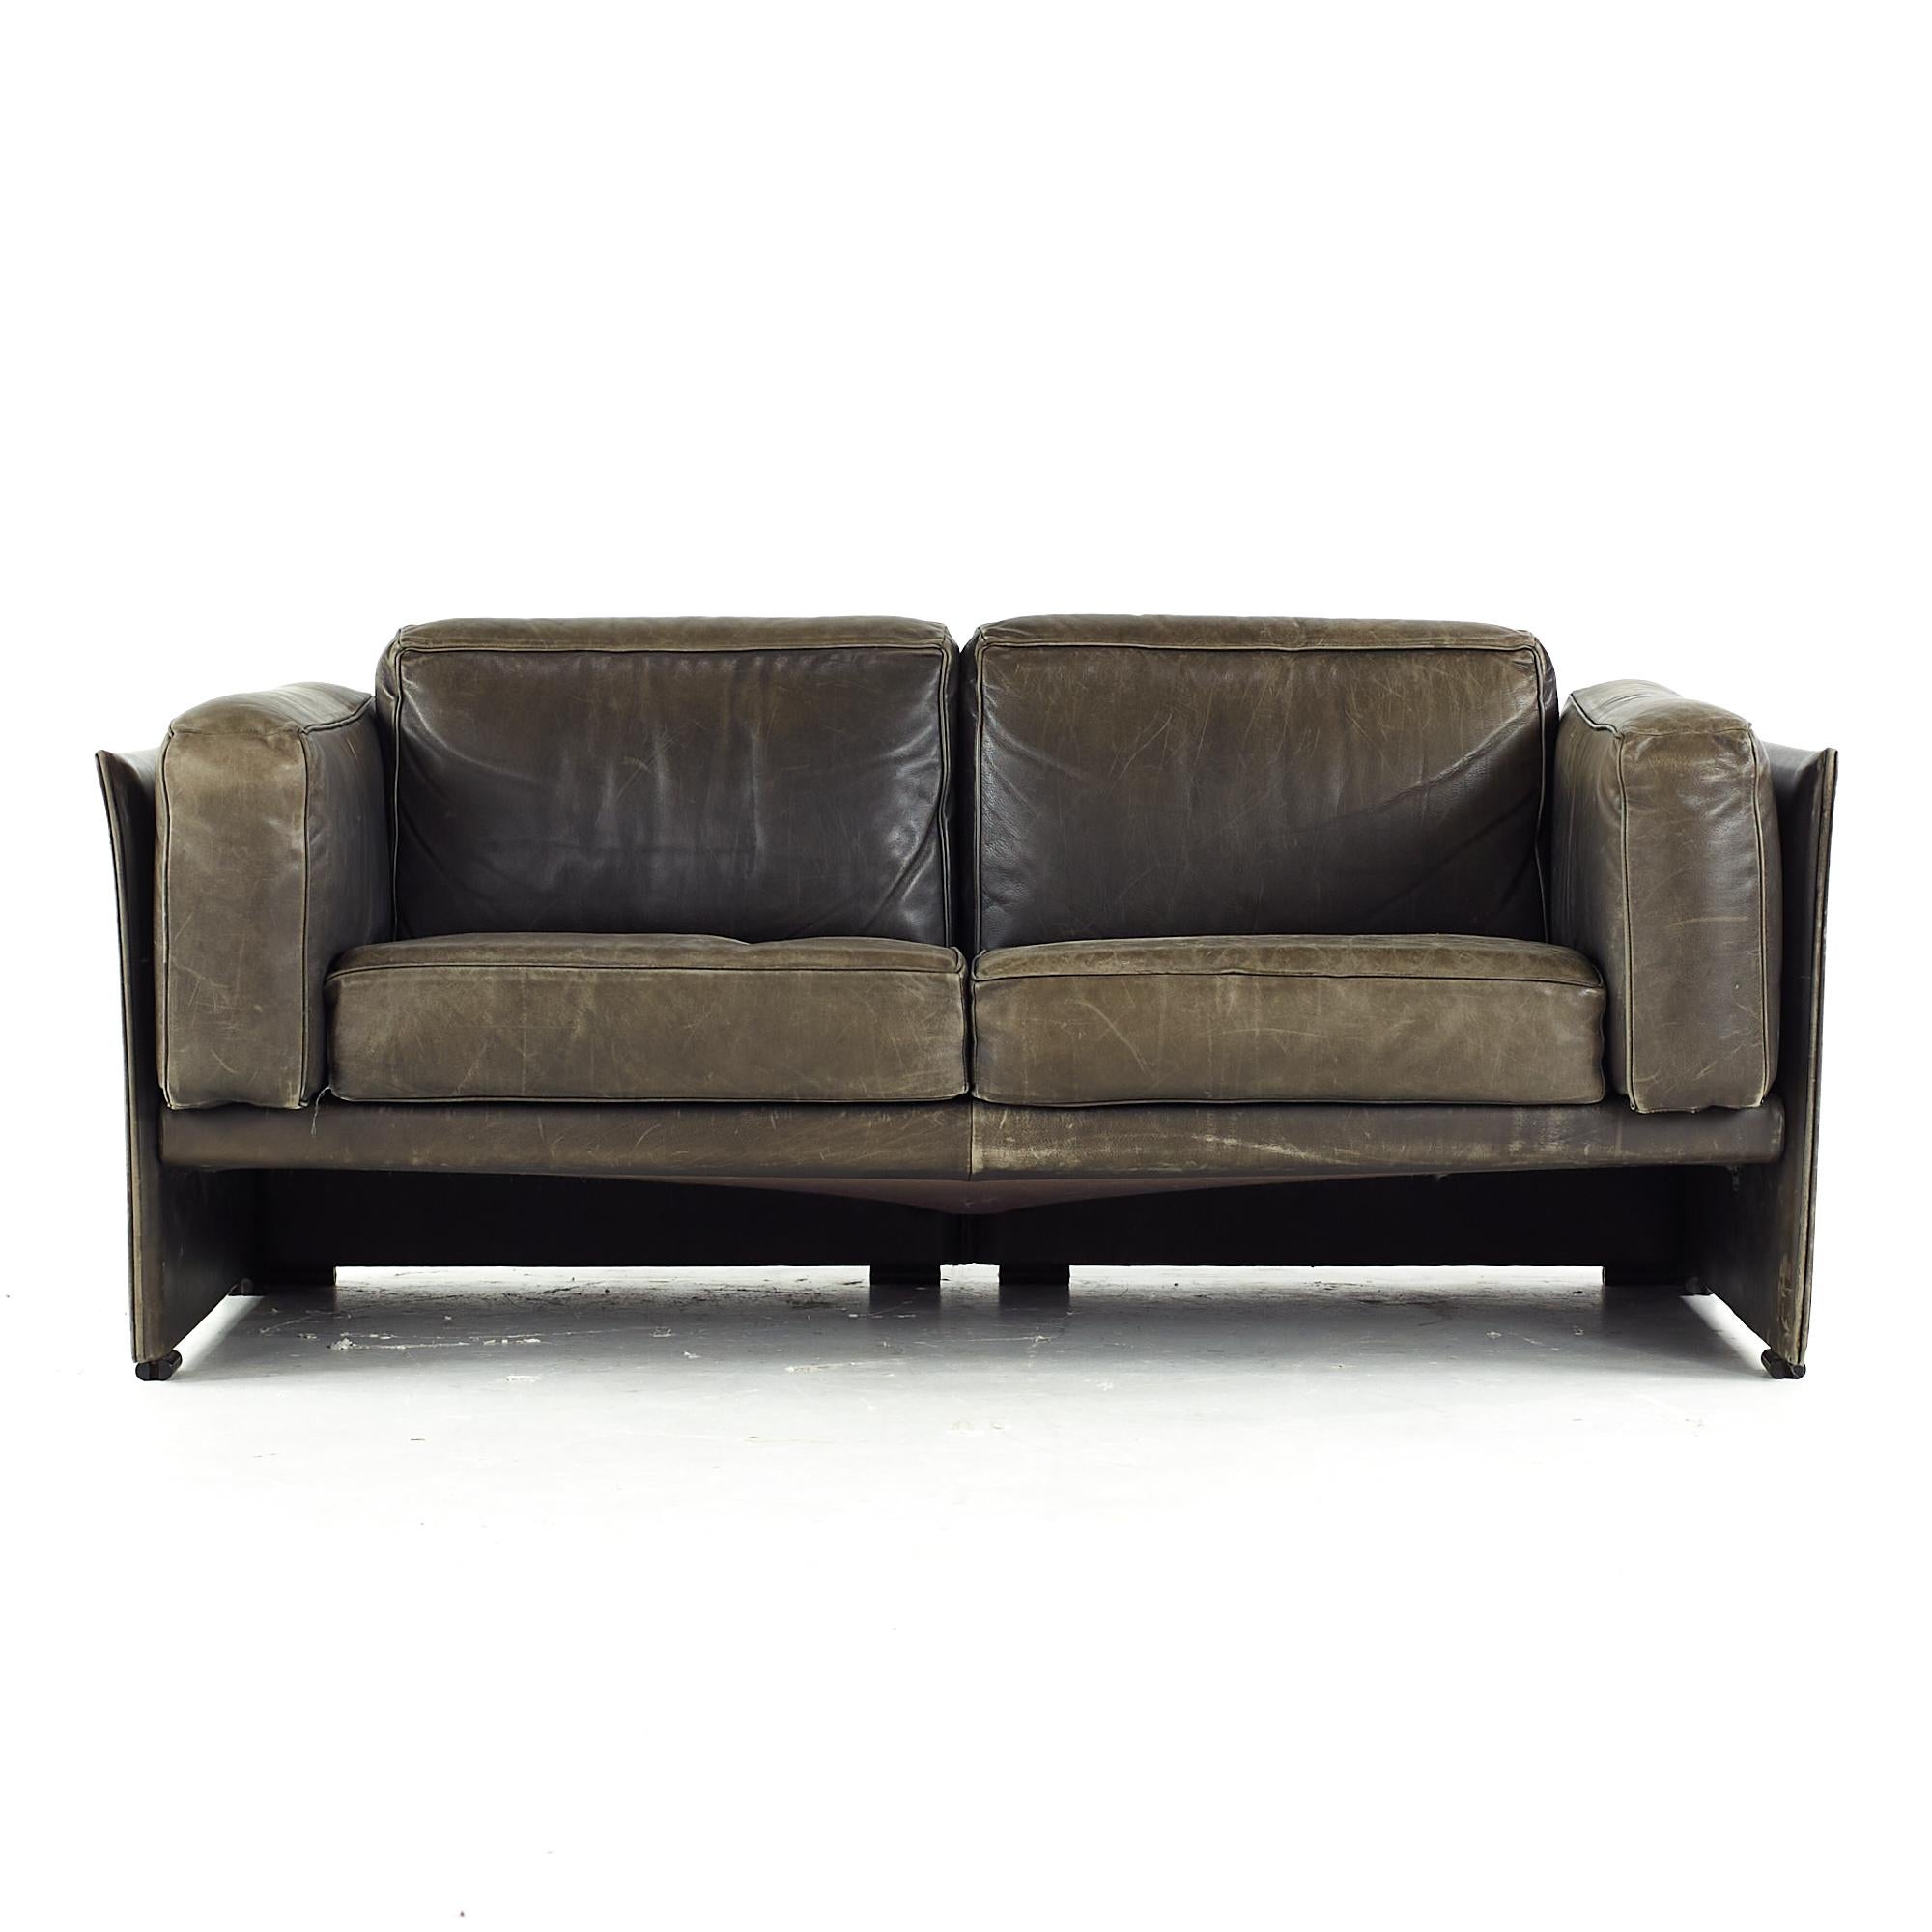 Late 20th Century Afra and Tobia Scarpa for Cassina Midcentury Italian Leather Sofas, Pair For Sale